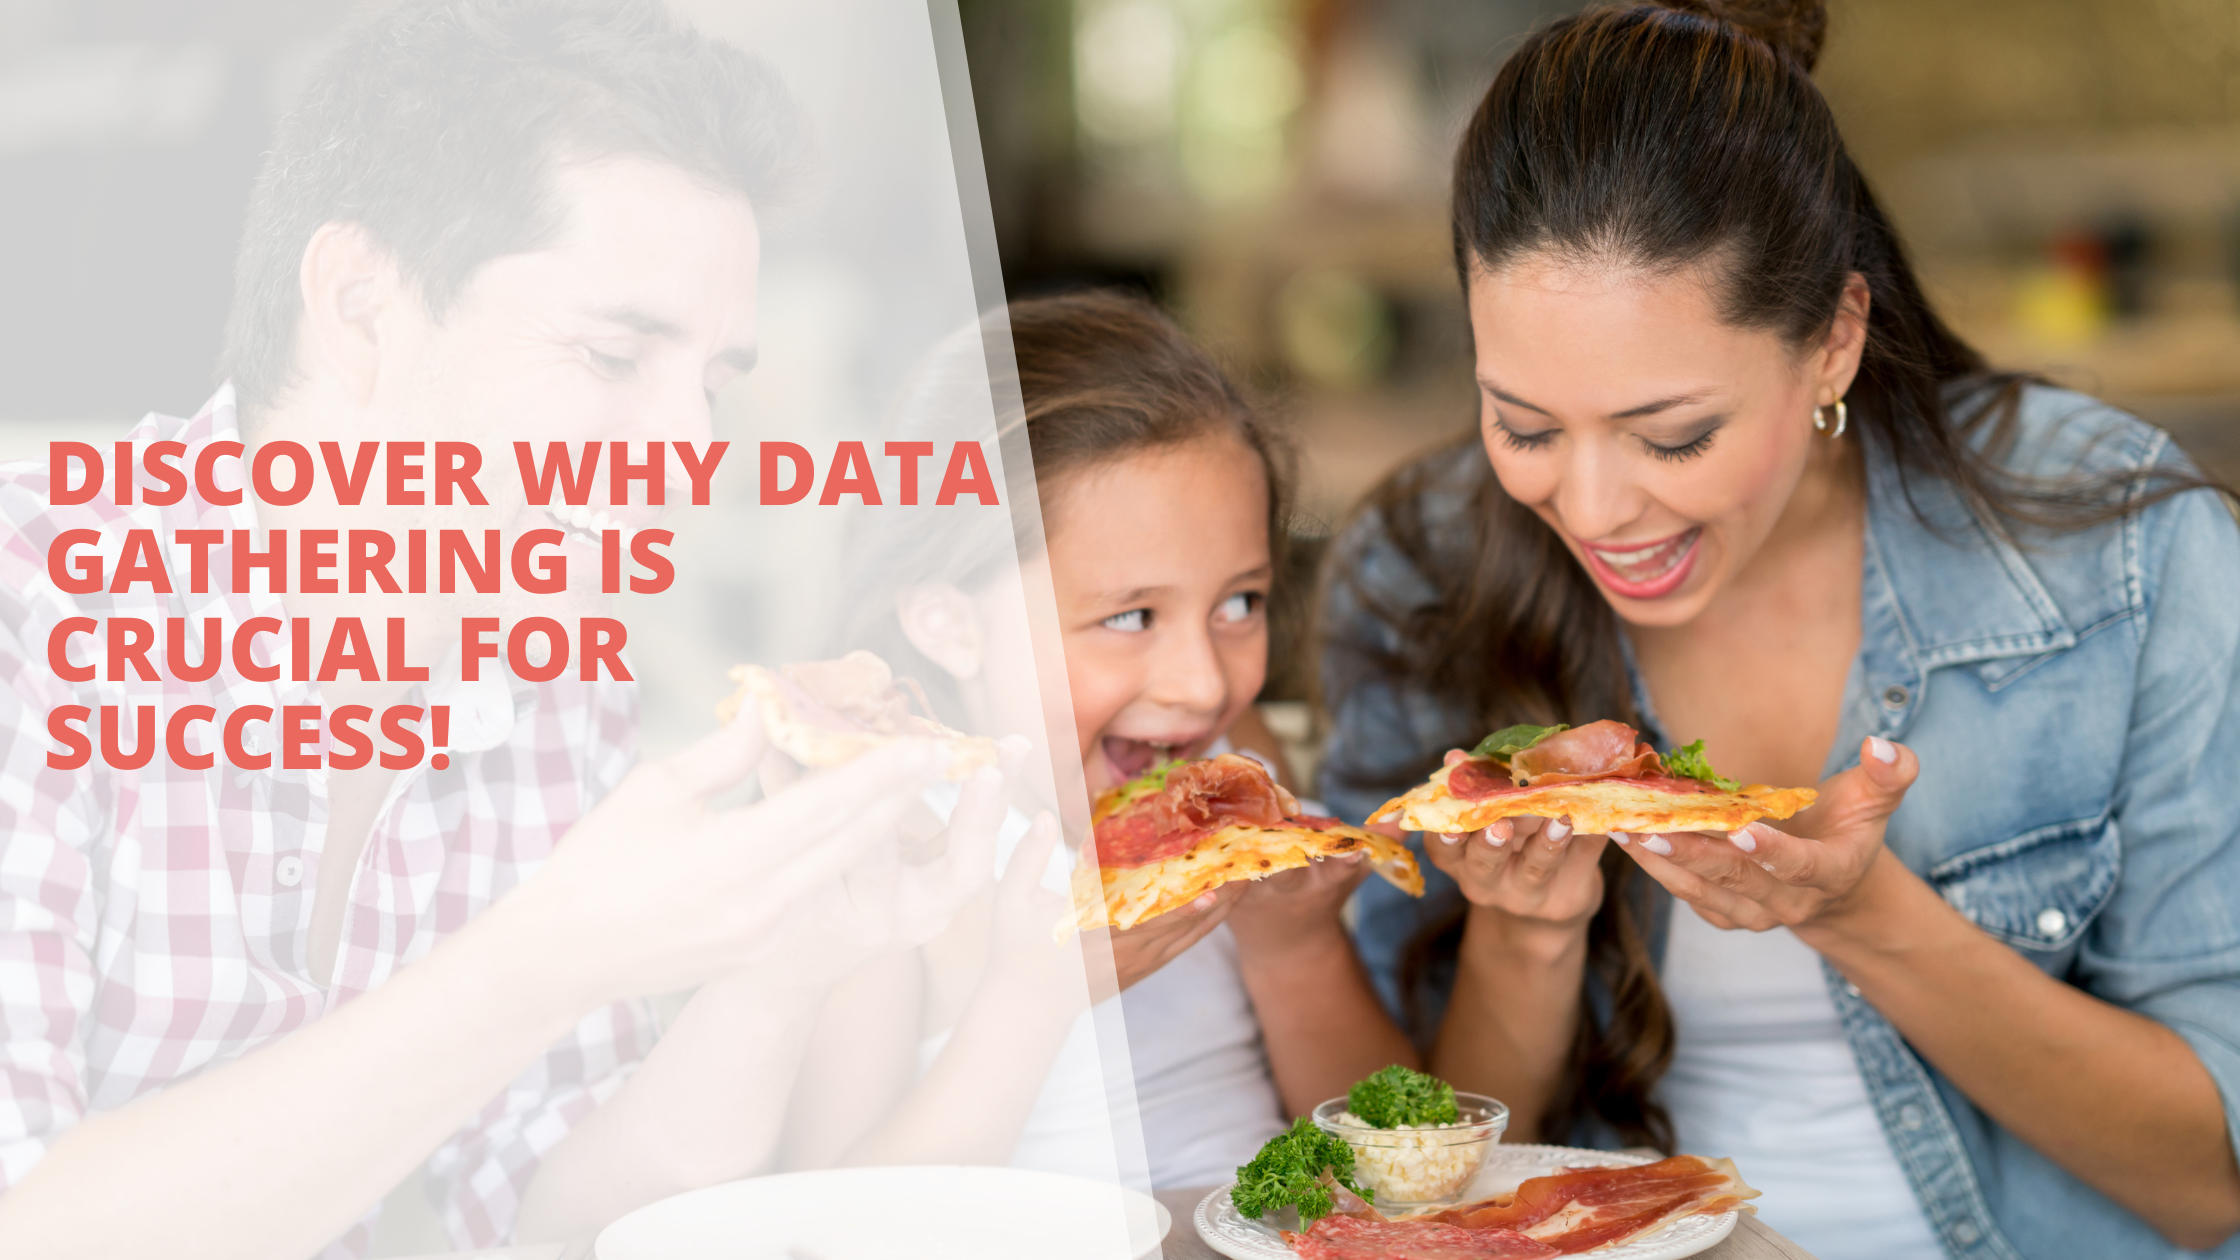 Discover why data gathering is crucial for success!